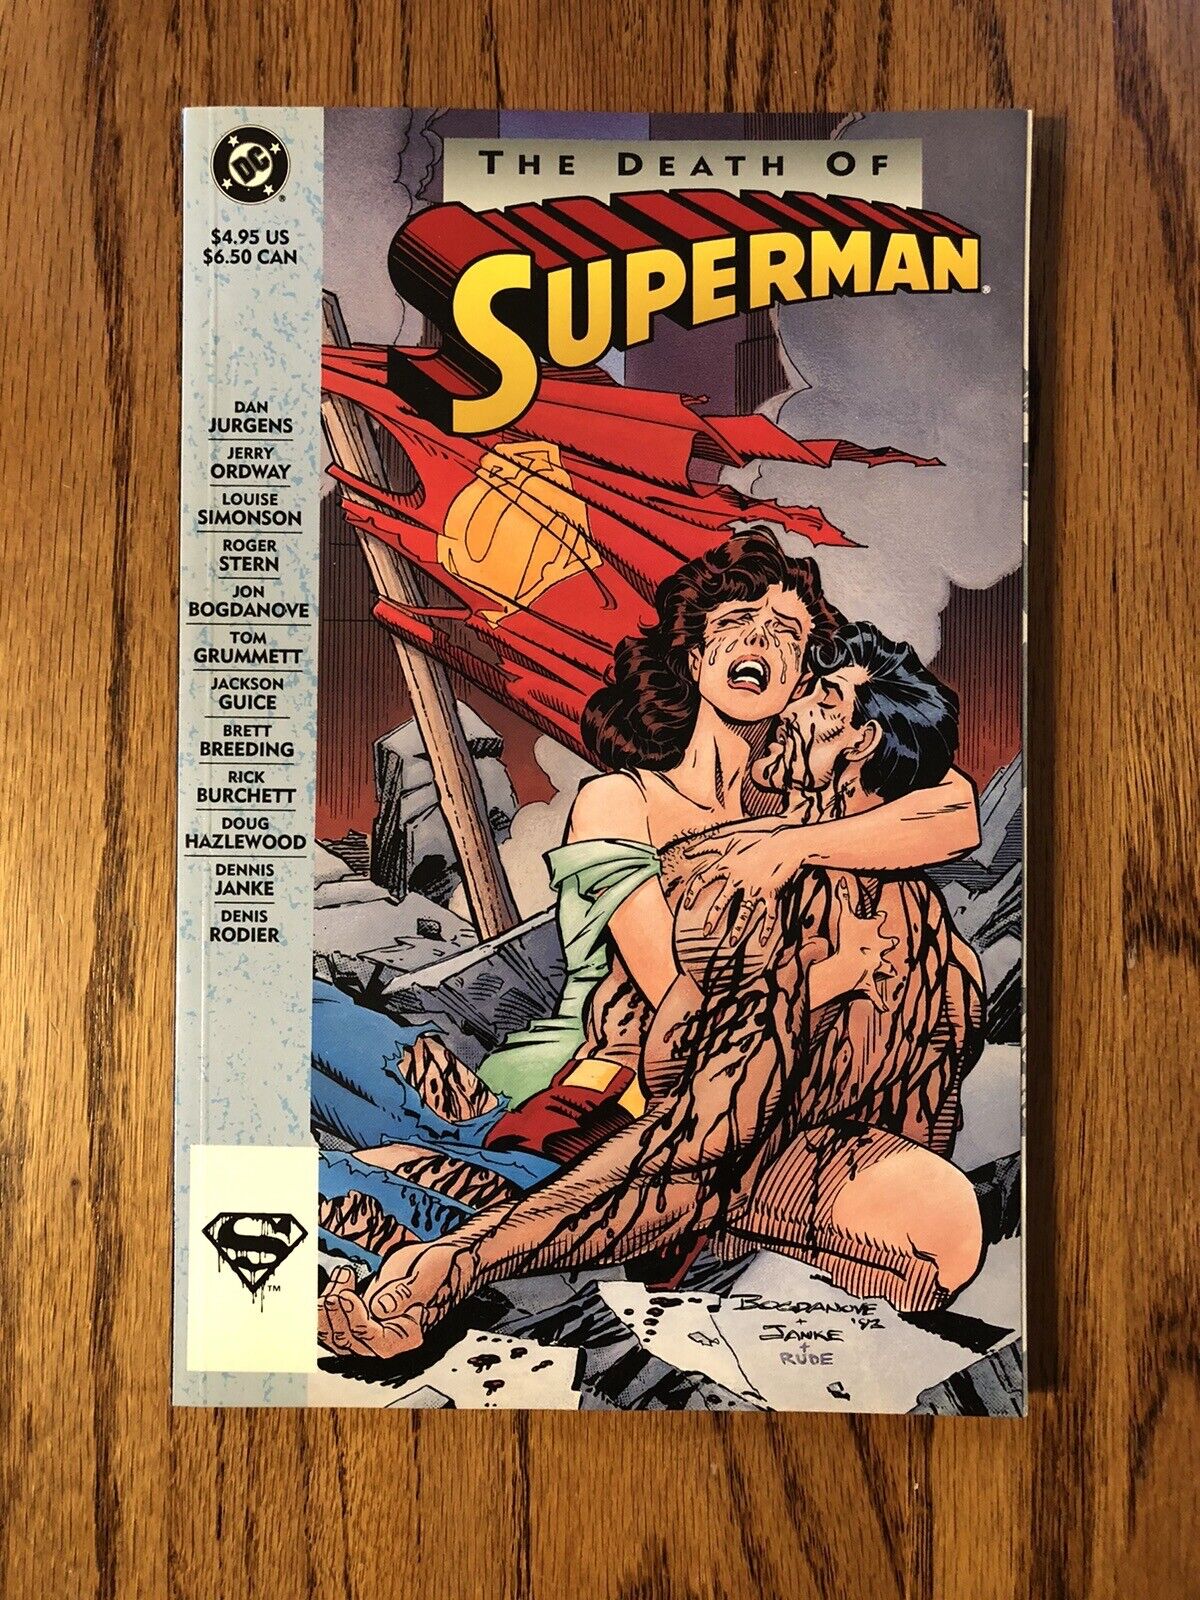 The Death of Superman (DC Comics, January 1993) first printing, VERY GOOD/MINT